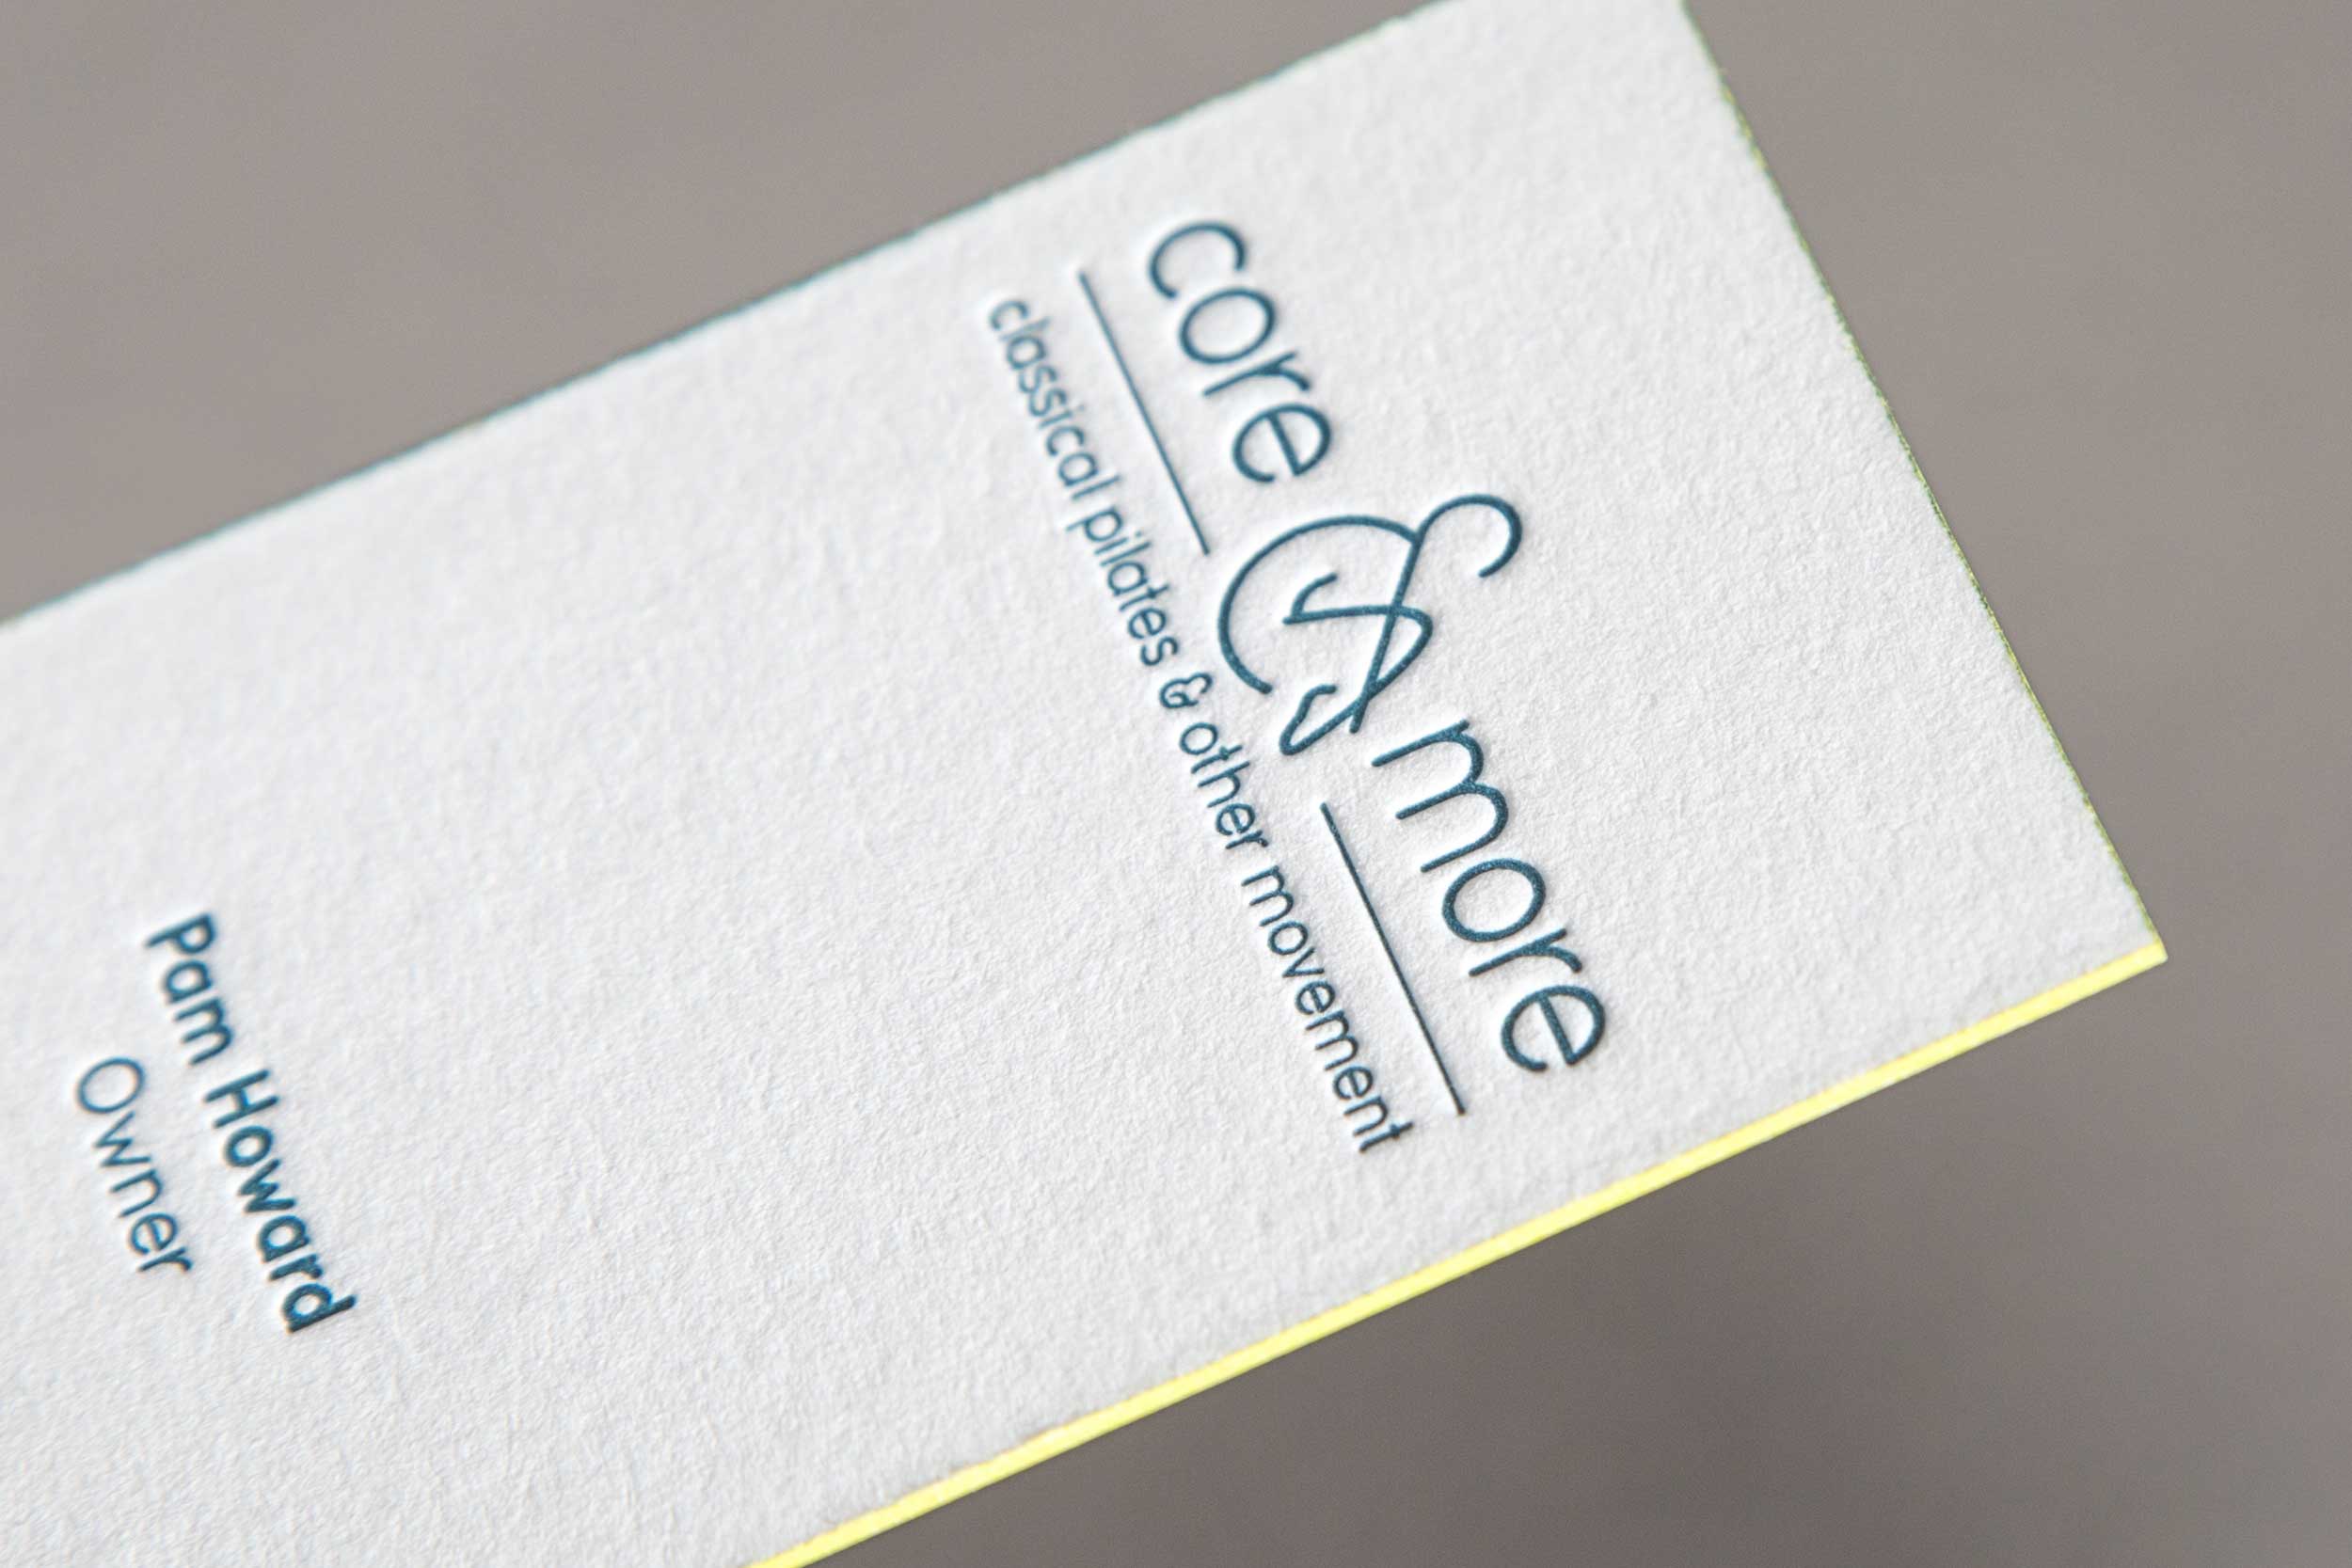 A close up of the Core and More business card to show the edge printing.